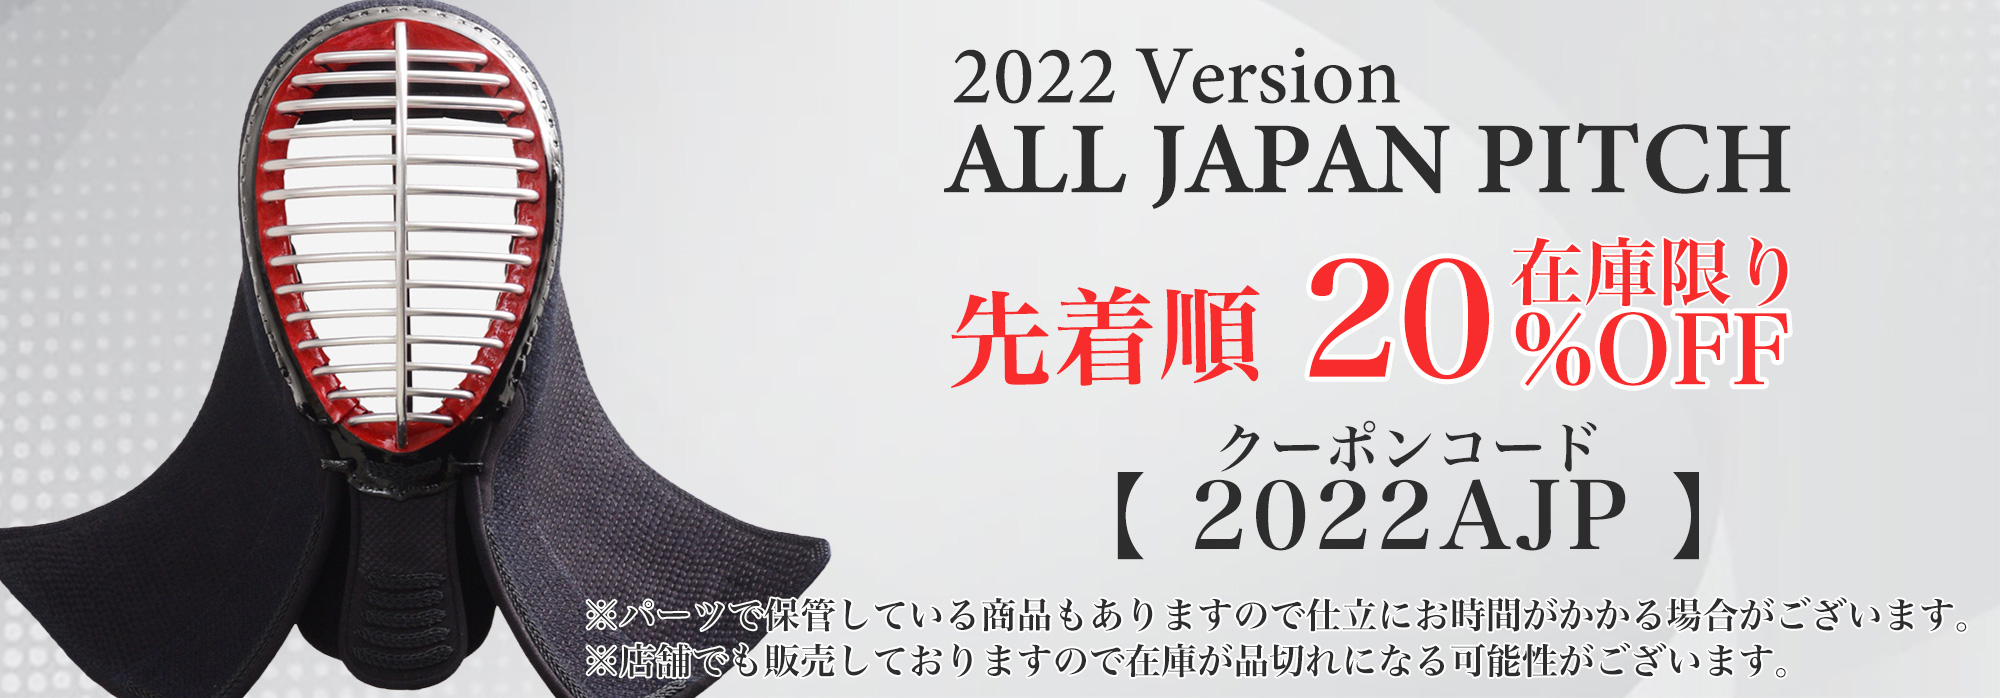 ALL JAPAN PITCH 2022限定セール